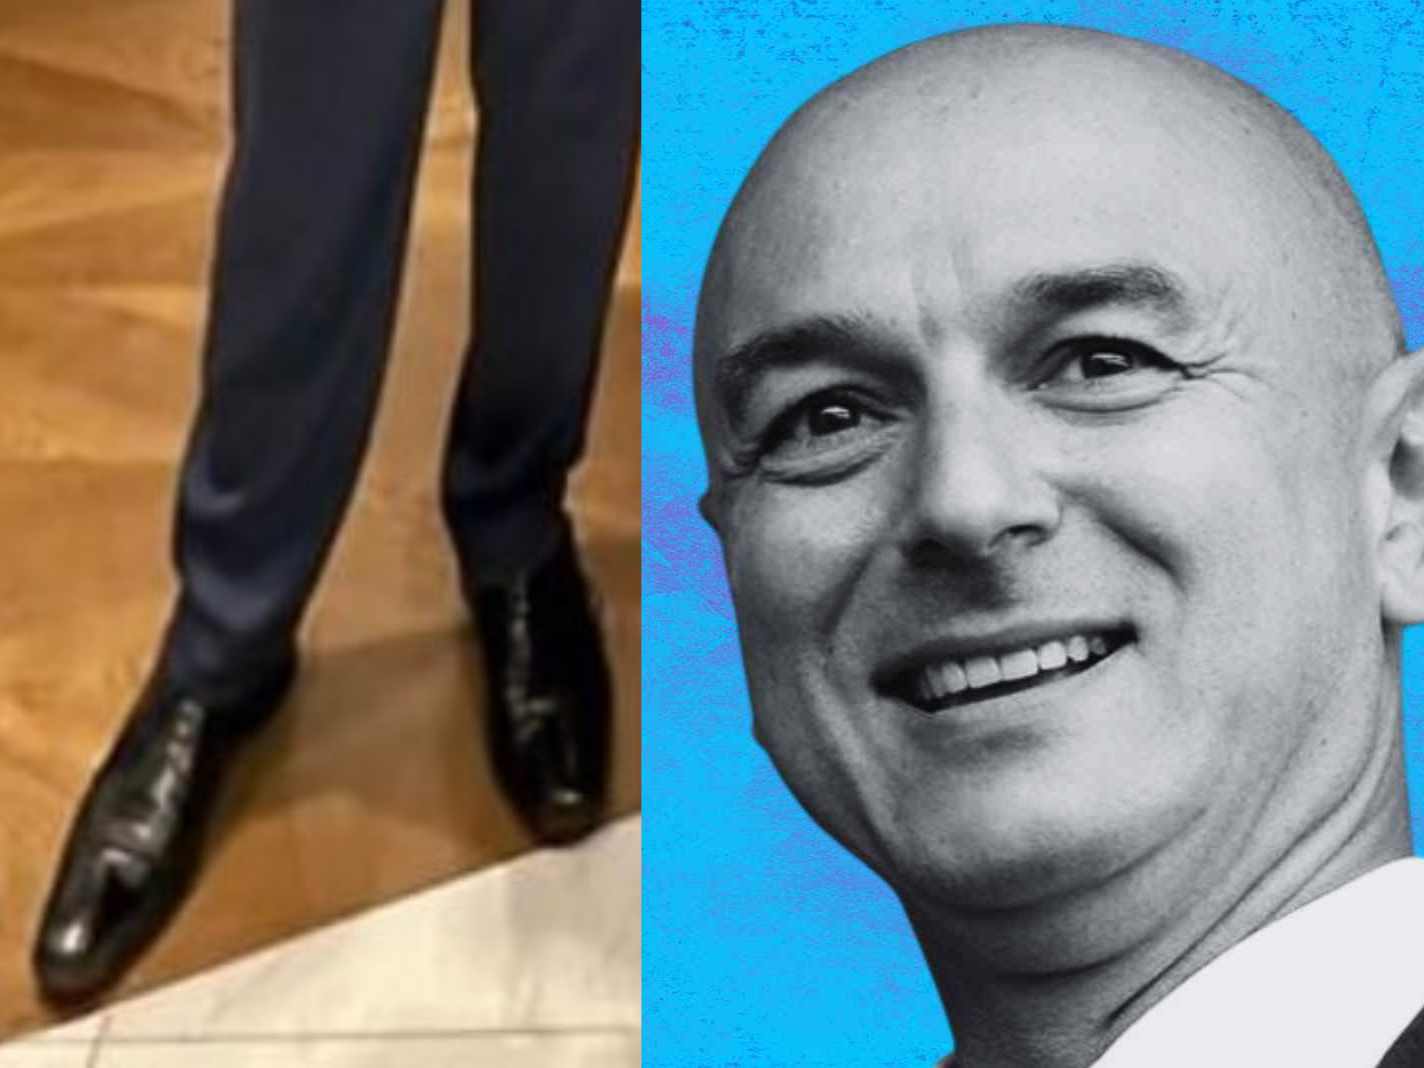 Does Daniel Levy Have Supersized Feet? Here’s the Truth Behind Viral Photo